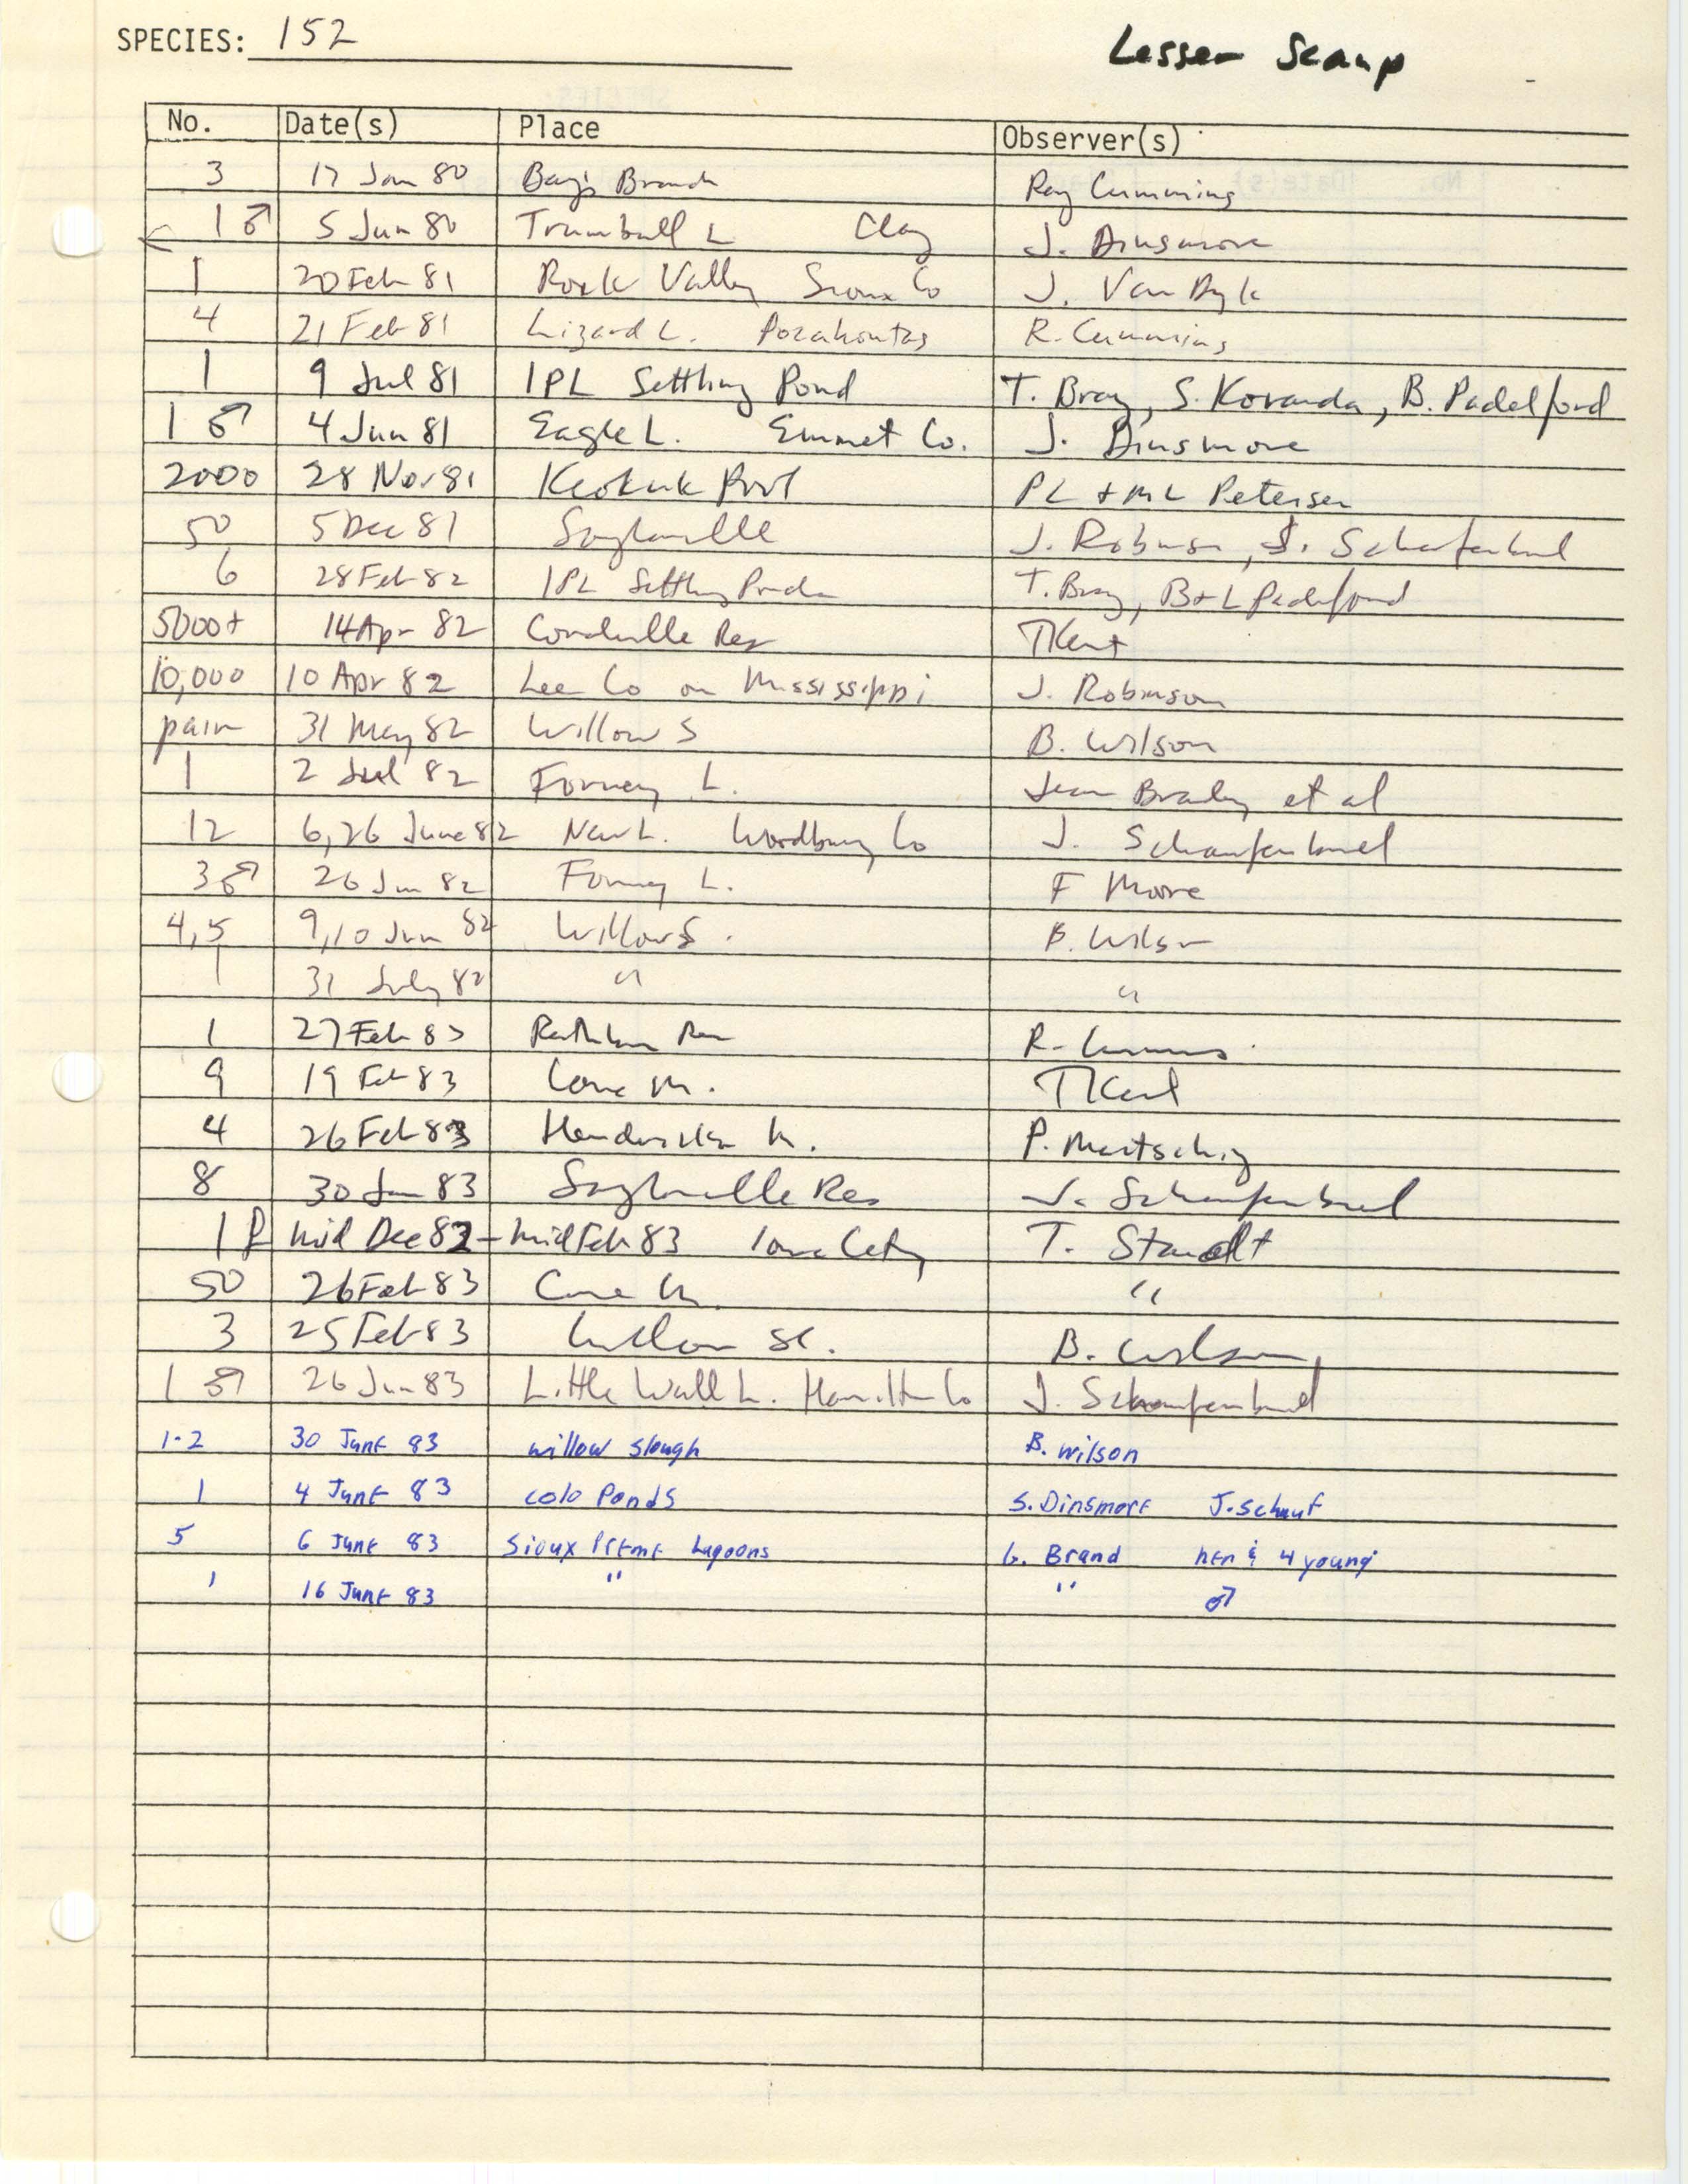 Iowa Ornithologists' Union, field report compiled data, Lesser Scaup, 1980-1983